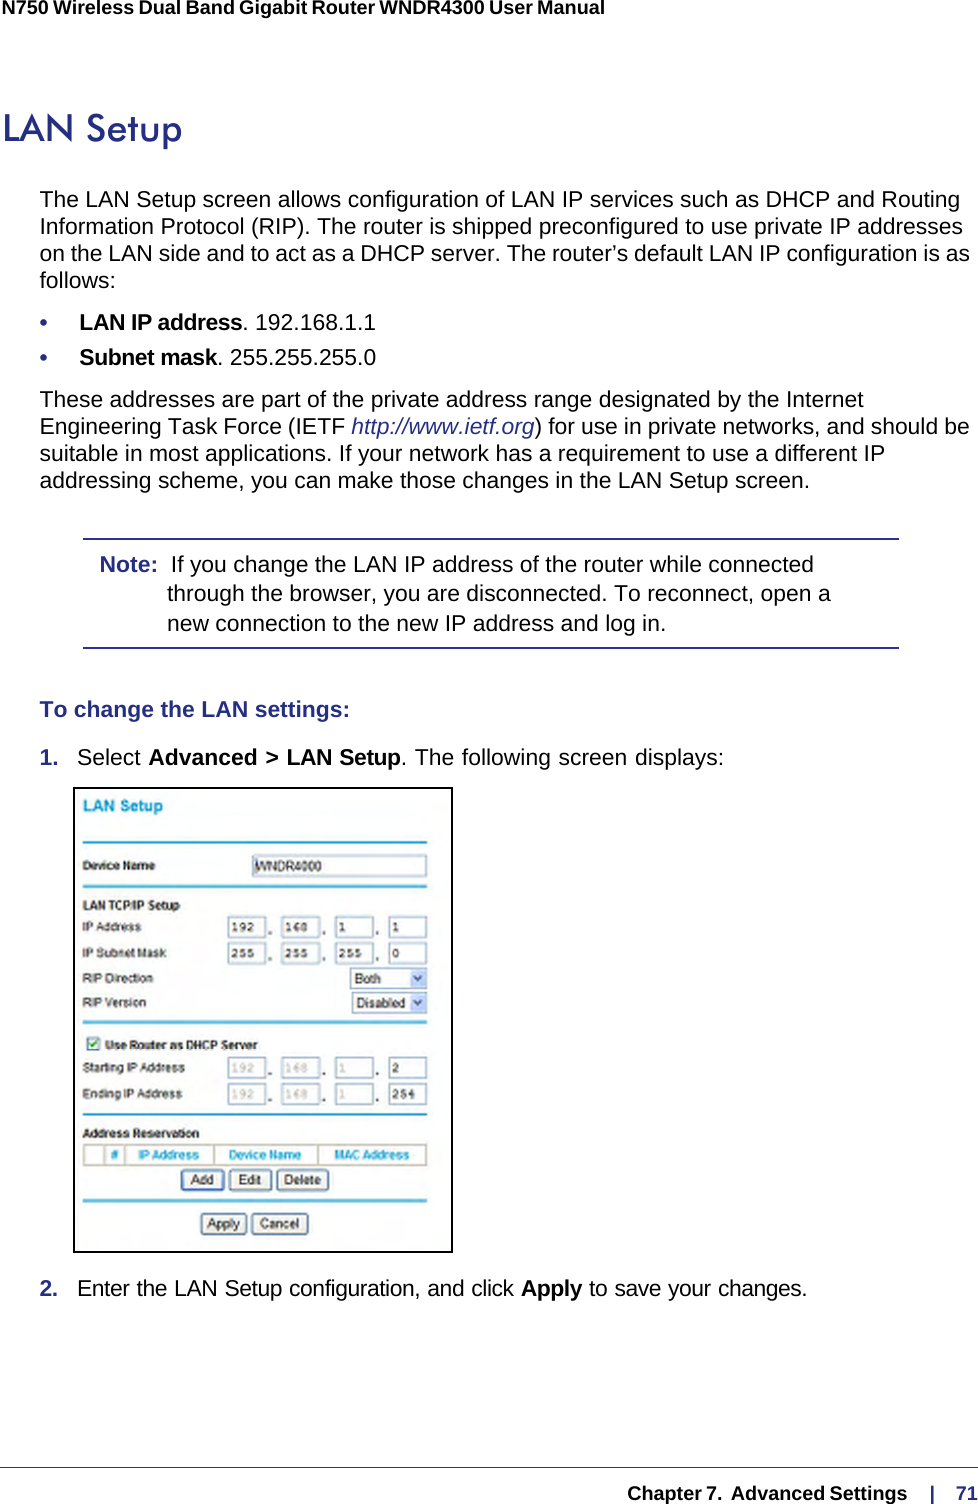   Chapter 7.  Advanced Settings     |    71N750 Wireless Dual Band Gigabit Router WNDR4300 User Manual LAN SetupThe LAN Setup screen allows configuration of LAN IP services such as DHCP and Routing Information Protocol (RIP). The router is shipped preconfigured to use private IP addresses on the LAN side and to act as a DHCP server. The router’s default LAN IP configuration is as follows:•     LAN IP address. 192.168.1.1•     Subnet mask. 255.255.255.0These addresses are part of the private address range designated by the Internet Engineering Task Force (IETF http://www.ietf.org) for use in private networks, and should be suitable in most applications. If your network has a requirement to use a different IP addressing scheme, you can make those changes in the LAN Setup screen.Note:  If you change the LAN IP address of the router while connected through the browser, you are disconnected. To reconnect, open a new connection to the new IP address and log in.To change the LAN settings:1.  Select Advanced &gt; LAN Setup. The following screen displays:2.  Enter the LAN Setup configuration, and click Apply to save your changes.